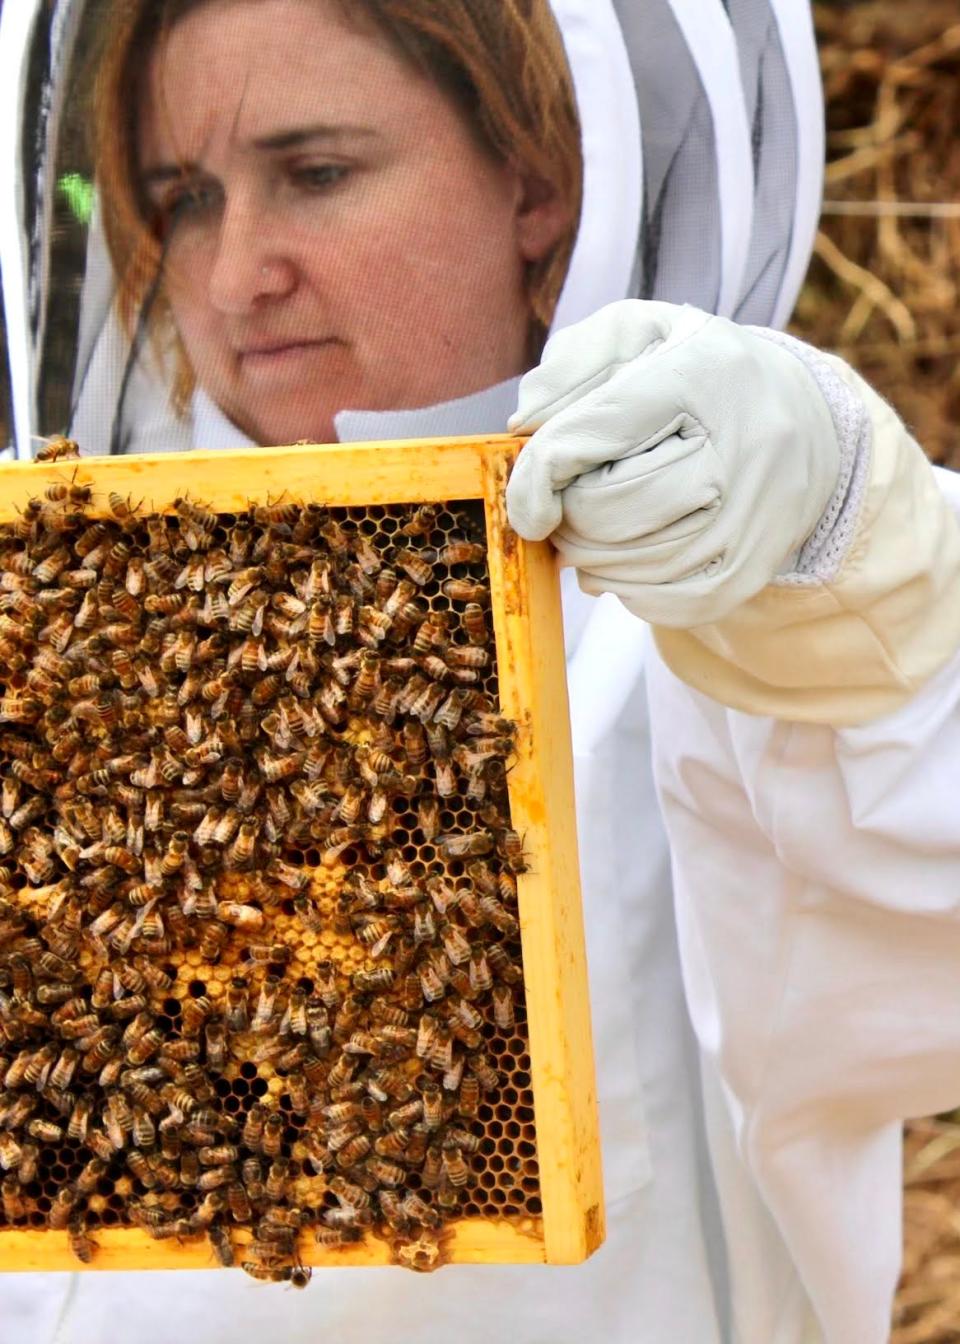 Shanti Volpe, founder of the Shanti Elixirs, with a beehive. Honey is a main ingredient in the beverage company's products.